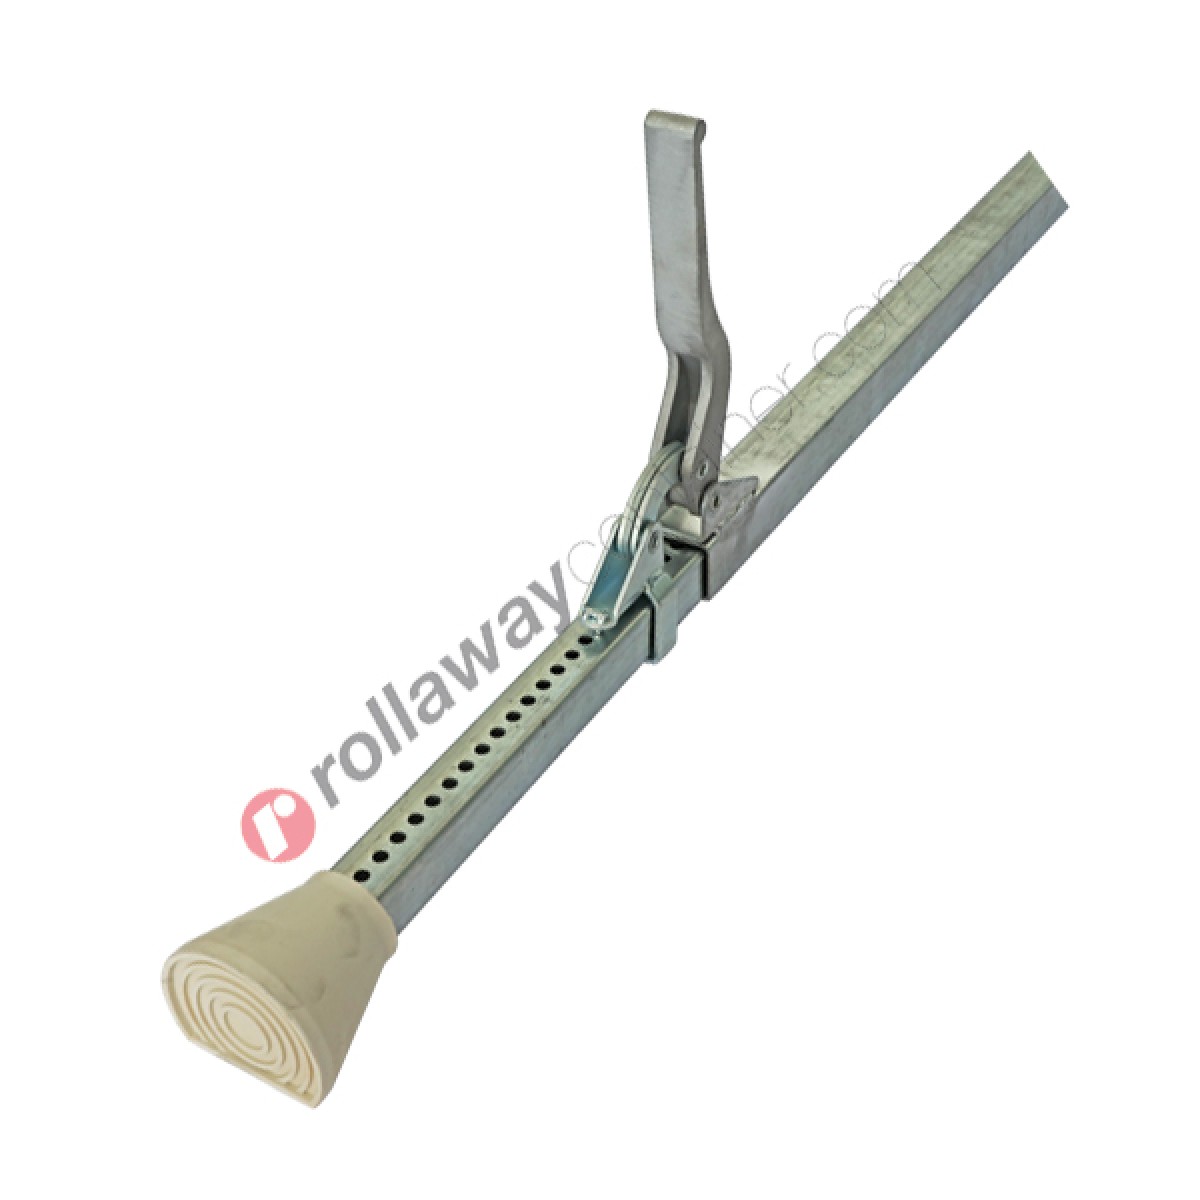 Load bar telescopic square in zinc-plated steel from 1.88 m to 2.86 m Zinc Plated Telescoping Square Tubes